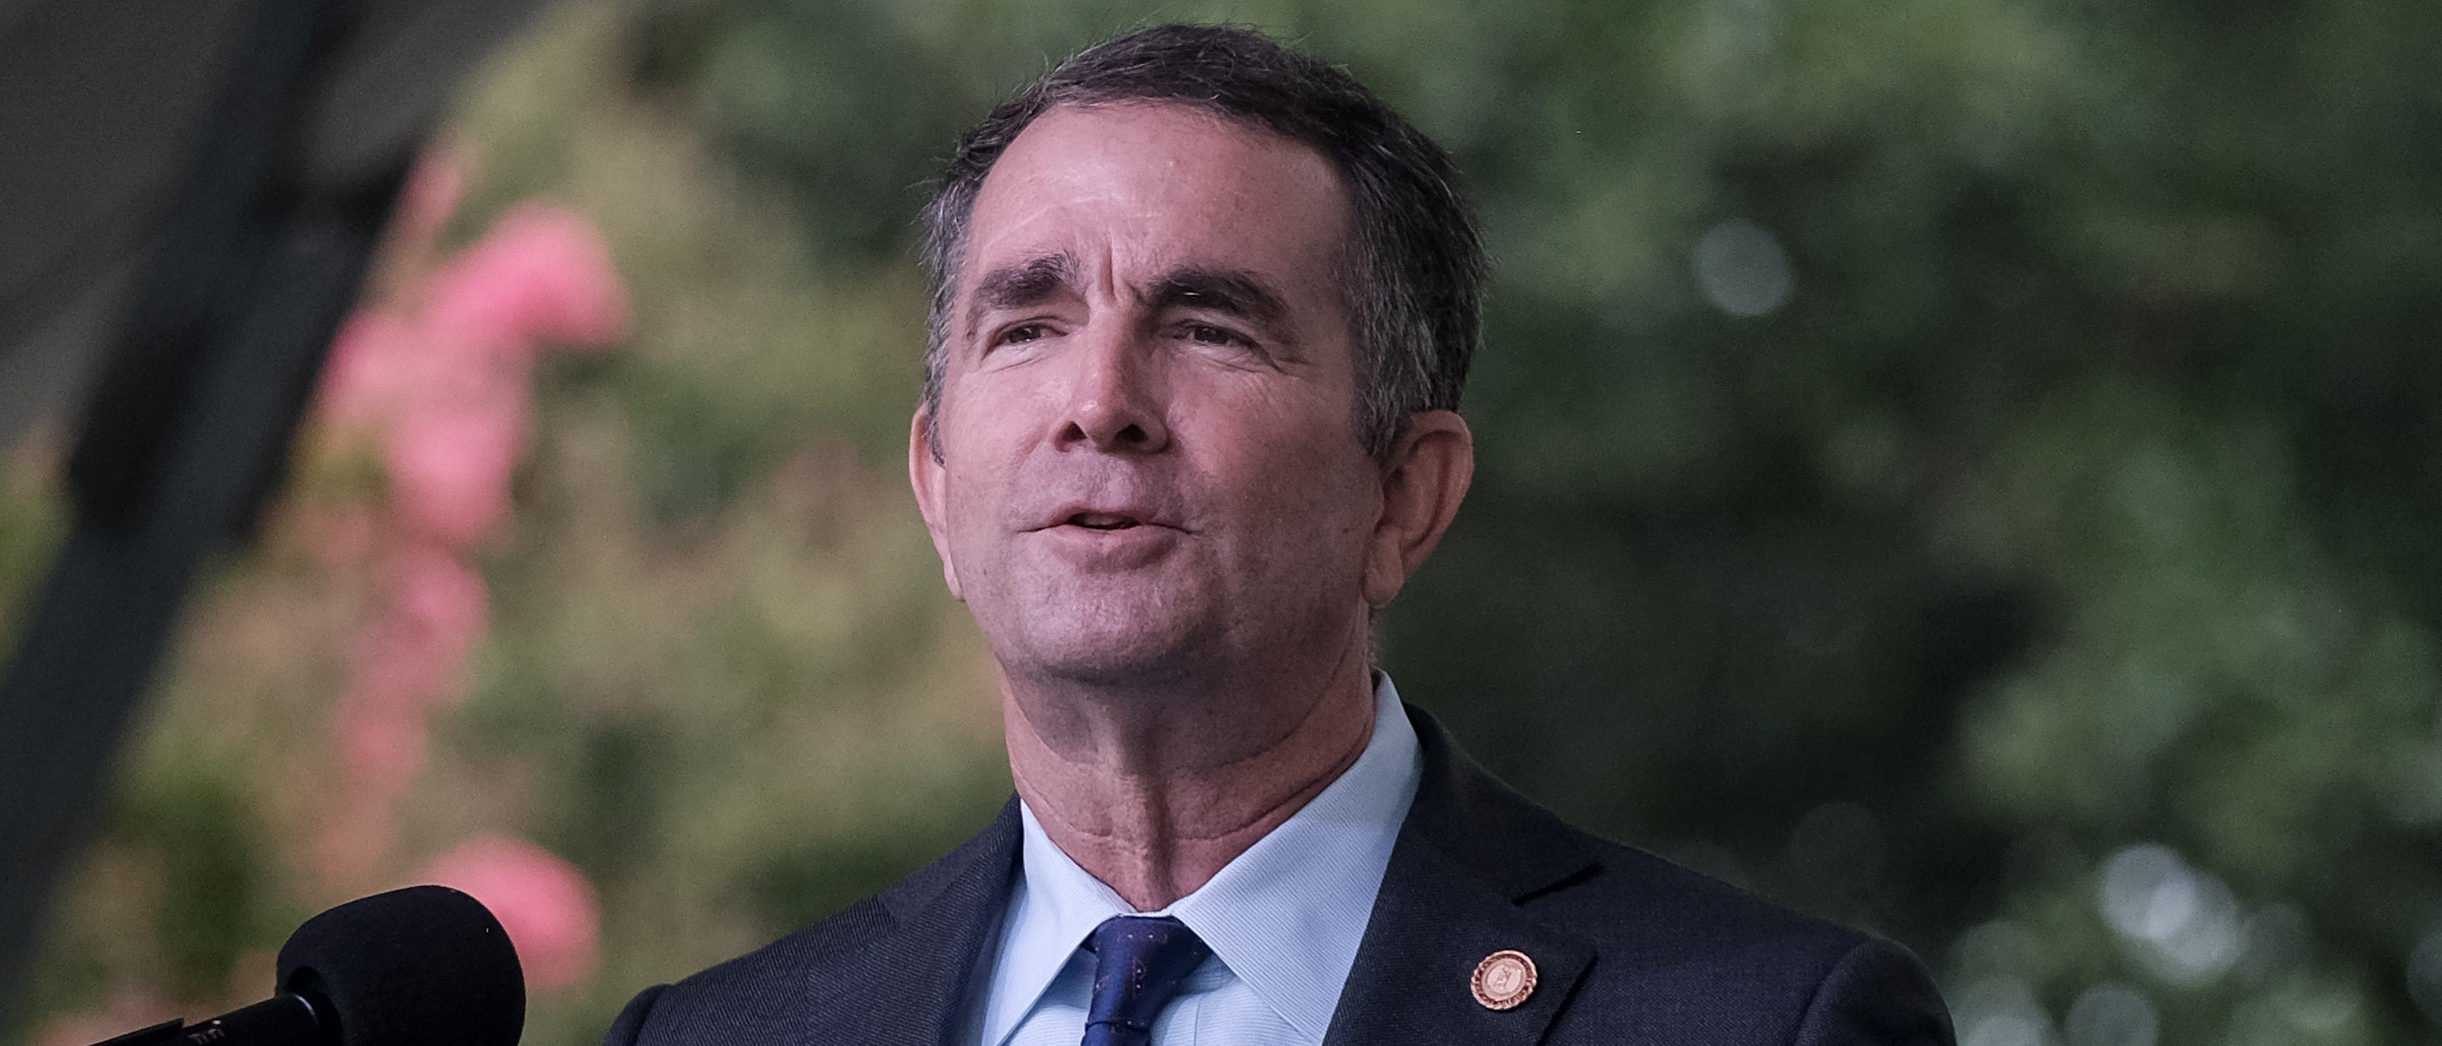 Virginia's Governor Ralph Northam delivers a speech. U.S., August 24, 2019. REUTERS/Michael A. McCoy